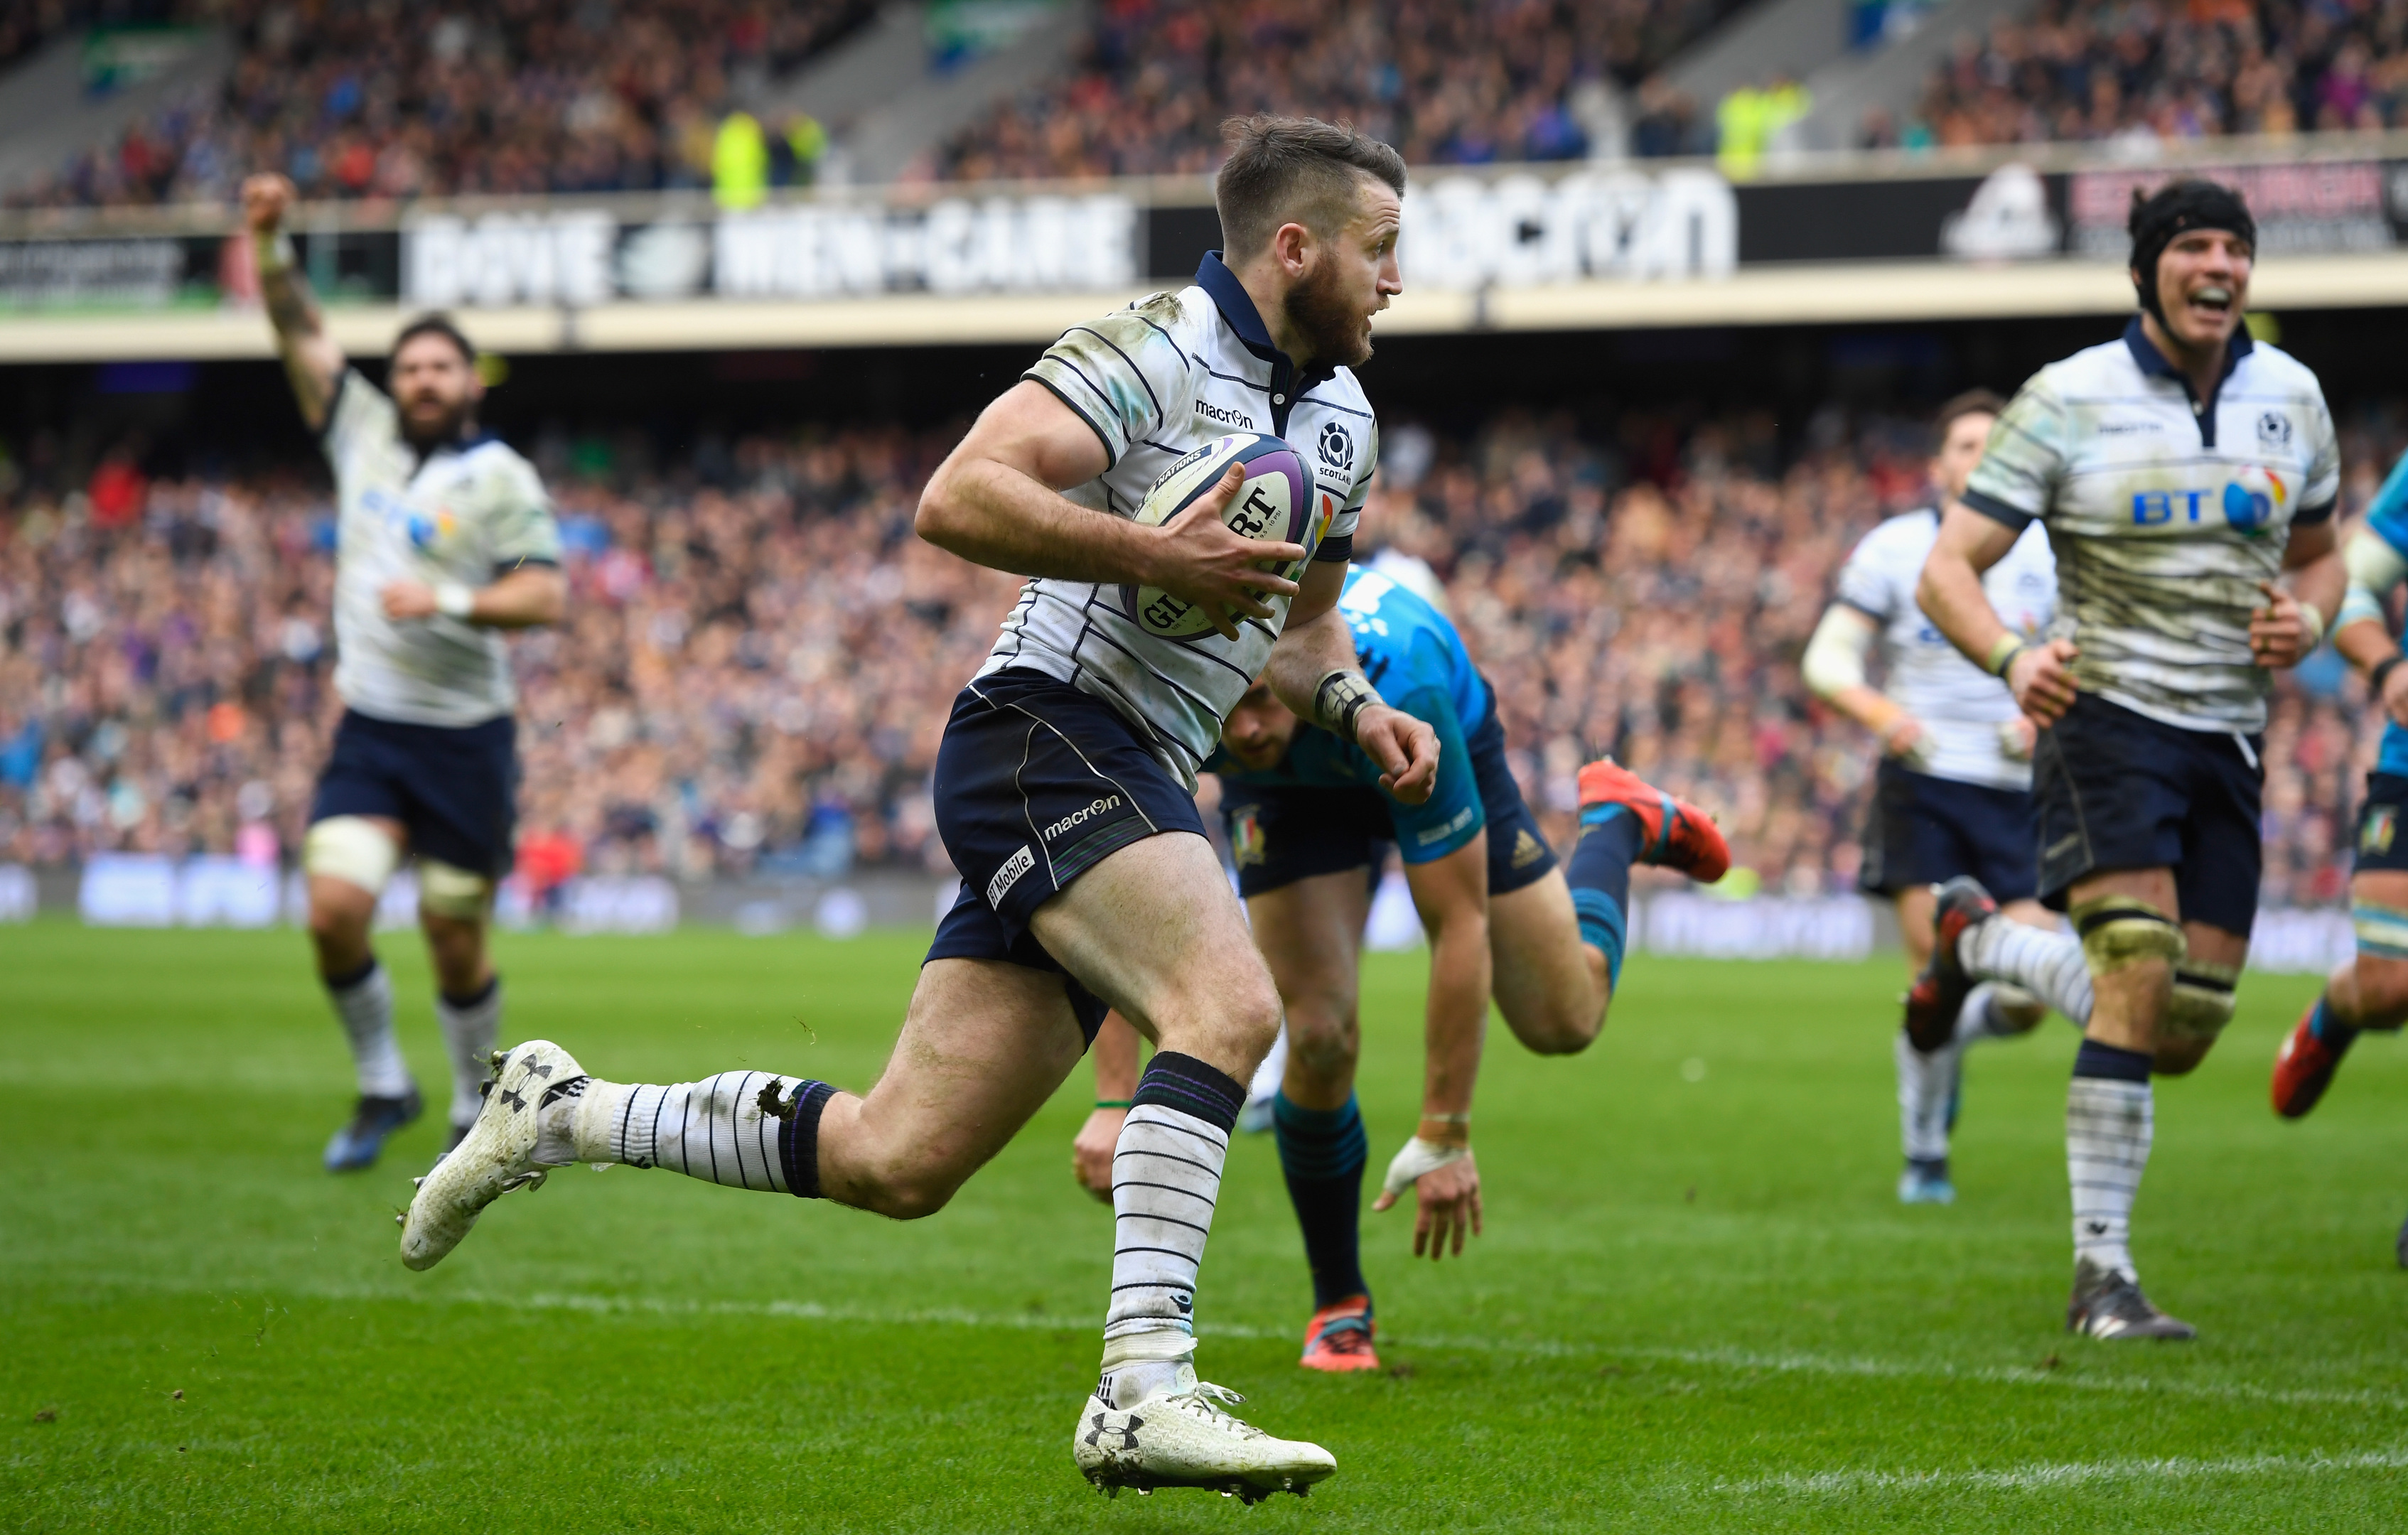 Tommy Seymour goes in for Scotland fourth and final try against Italy.